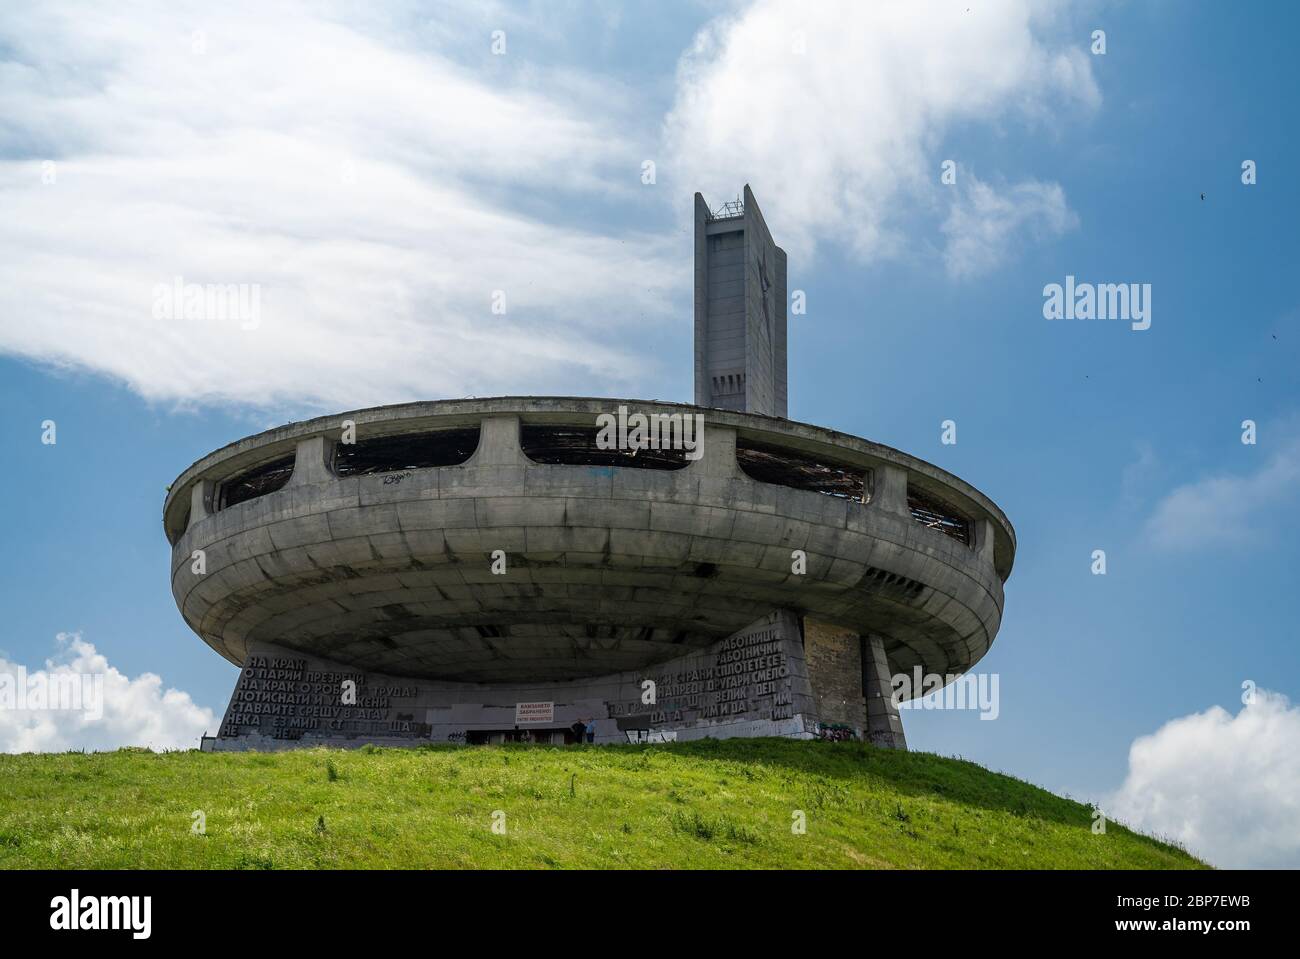 BUZLUDZHA, BULGARIA - JULY 07, 2019: The Monument House of the Bulgarian Communist Party on the Buzludzha Peak of the Balkan mountain range. At the moment, the monument is looted and abandoned. Stock Photo